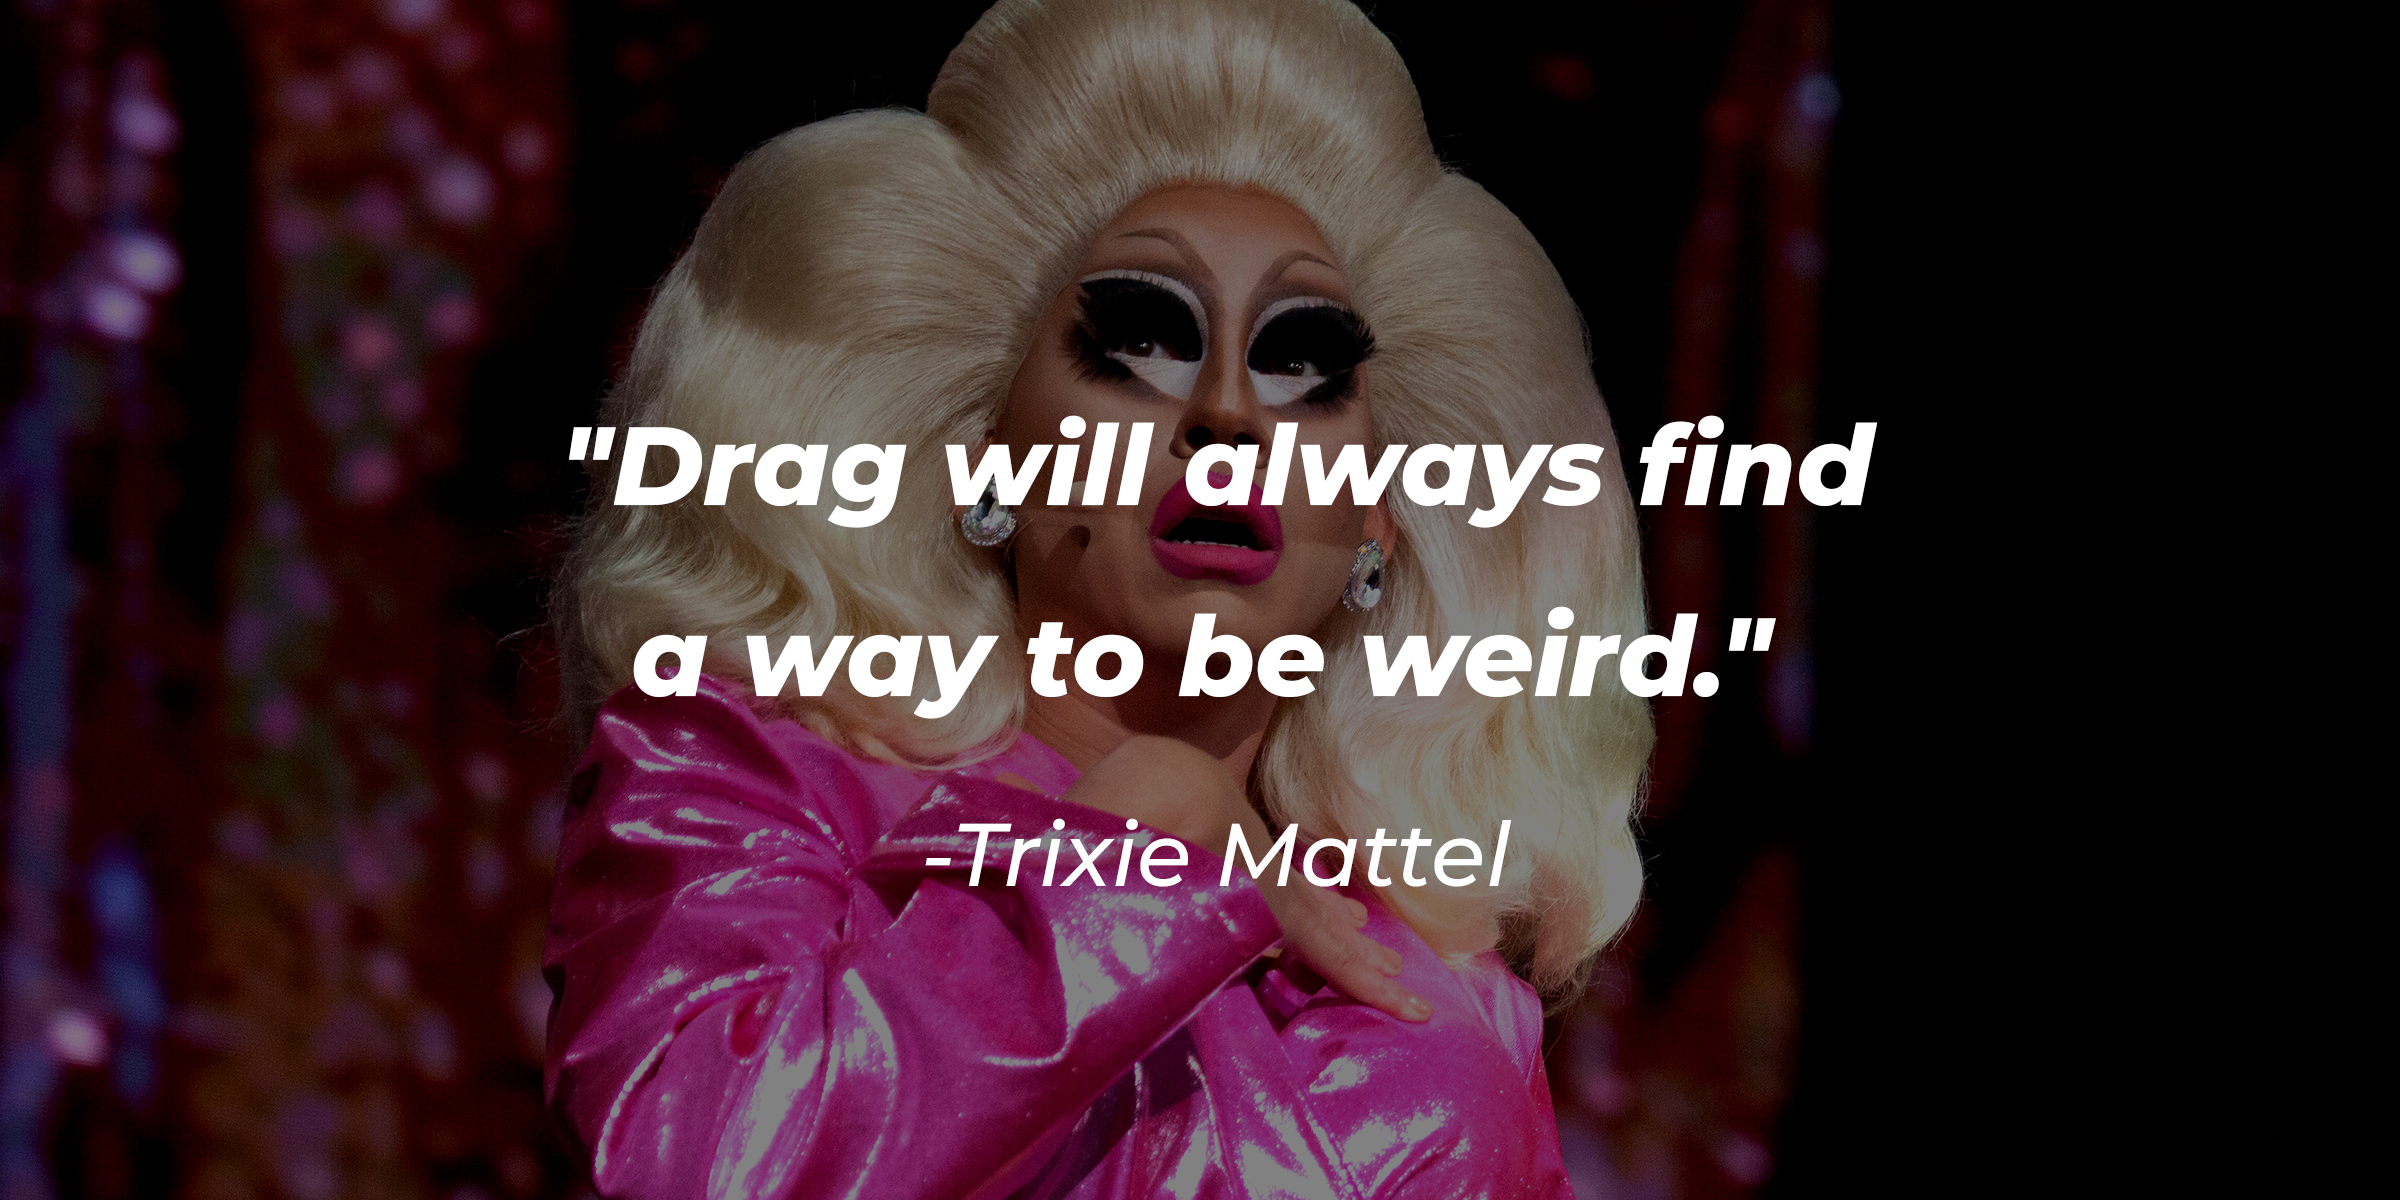 A photo of Trixie Mattel with the quote: "Drag will always find a way to be weird." | Source: Getty Images